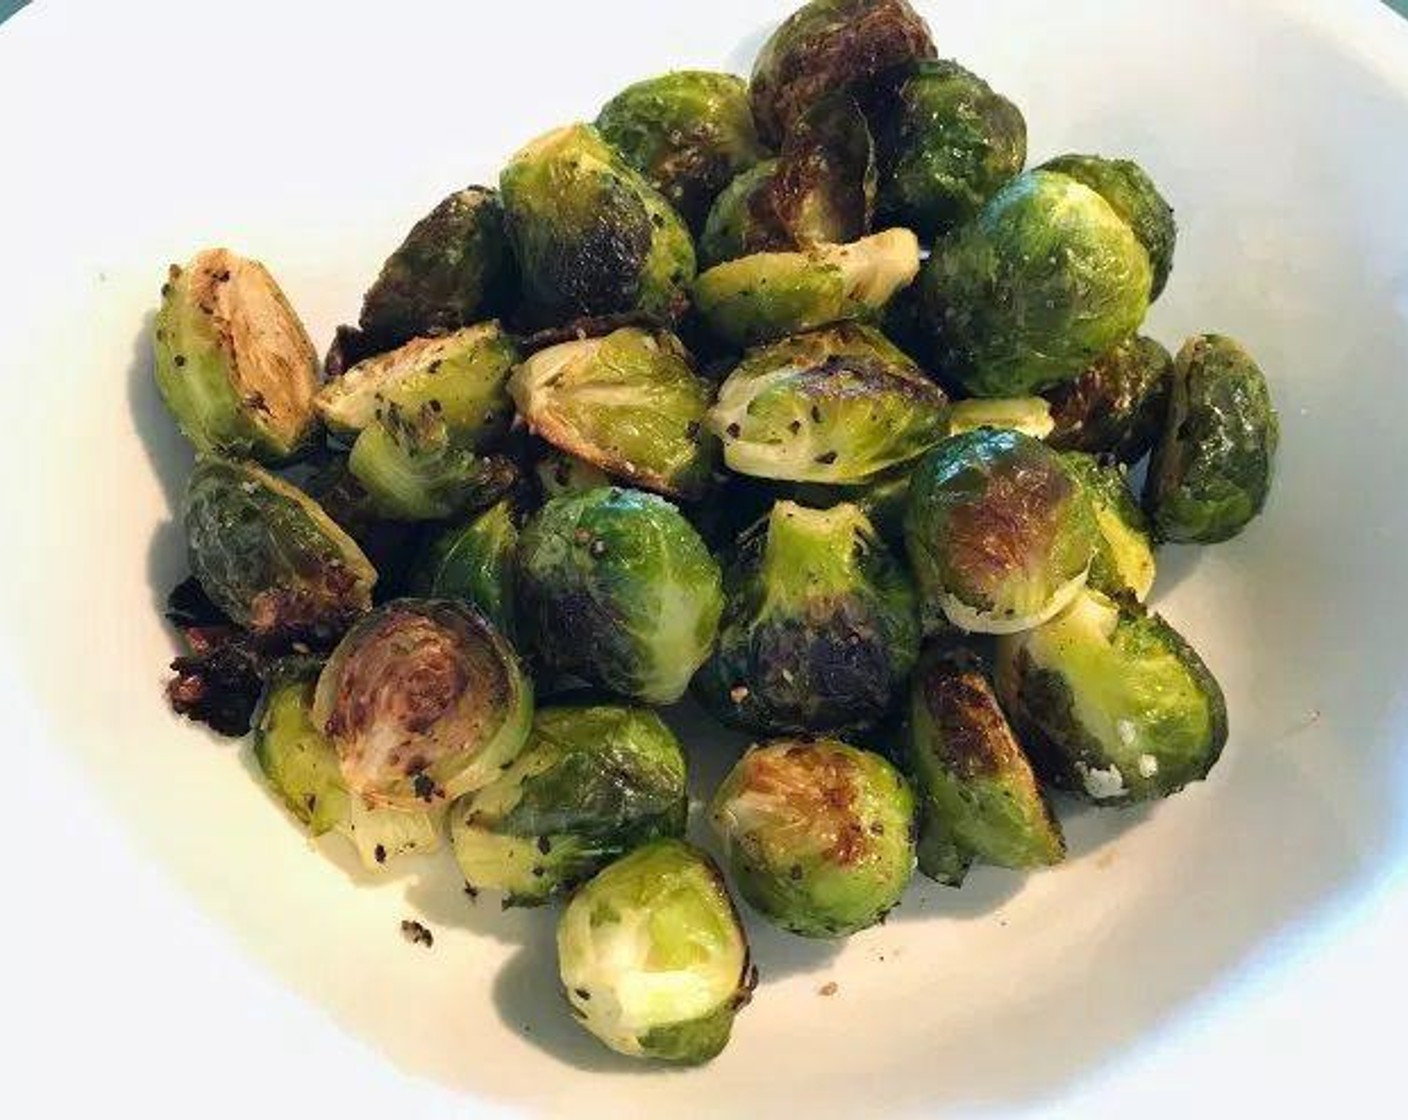 step 3 Add Extra-Virgin Olive Oil (1 Tbsp), Salt (1/4 tsp), and Coarse Black Pepper (1/2 tsp) to the Brussel sprouts. Mix until evenly coated. Bake for 25 minutes, stirring every 5 to 10 minutes.